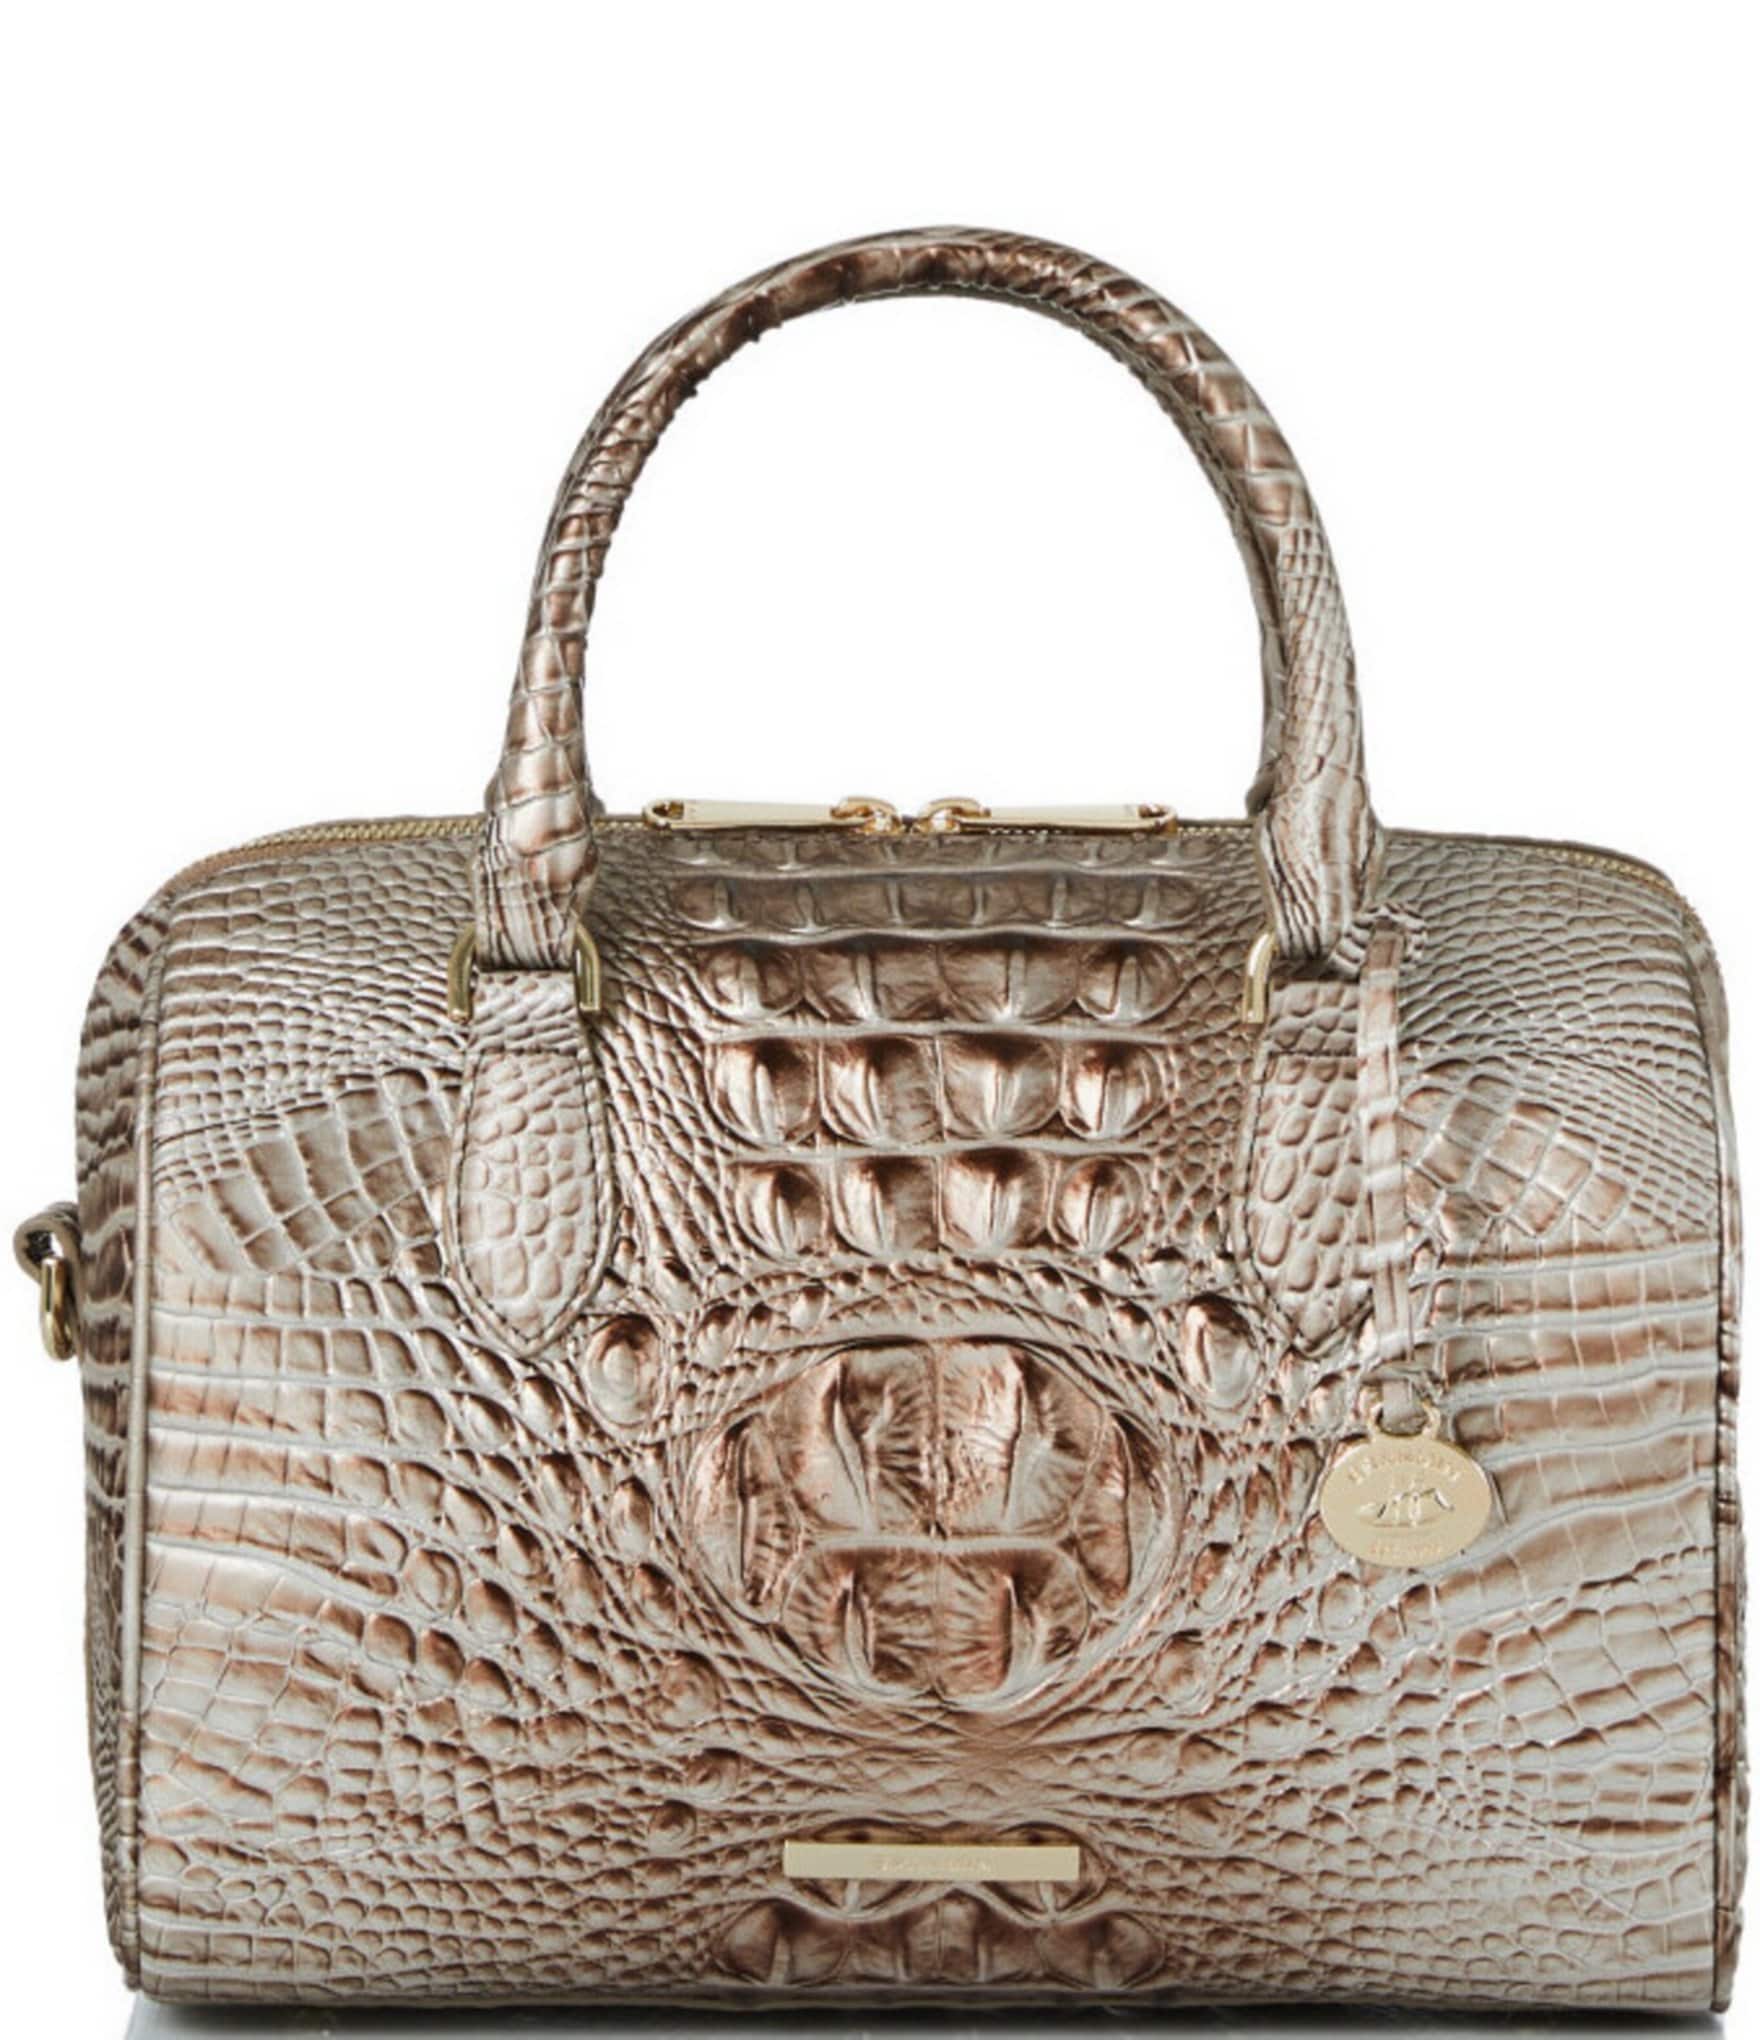 Splurge-worthy: We can't stop obsessing over this Brahmin purse